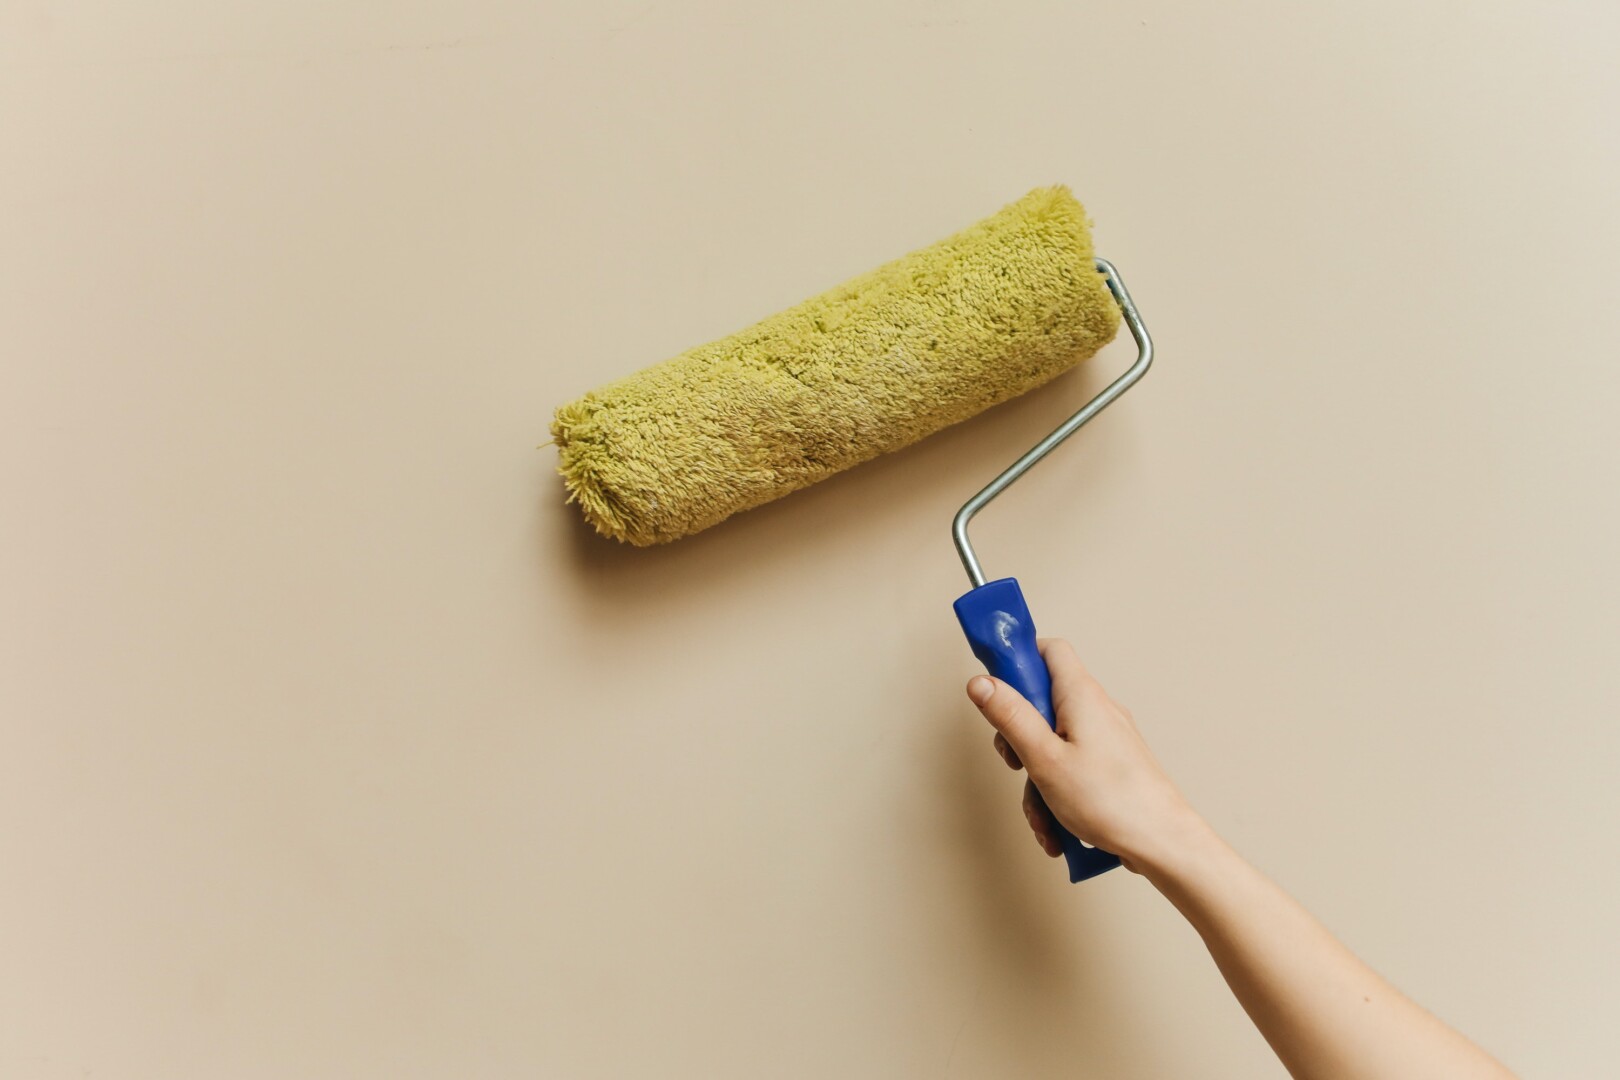 Paint your kitchen walls in a budget-friendly way